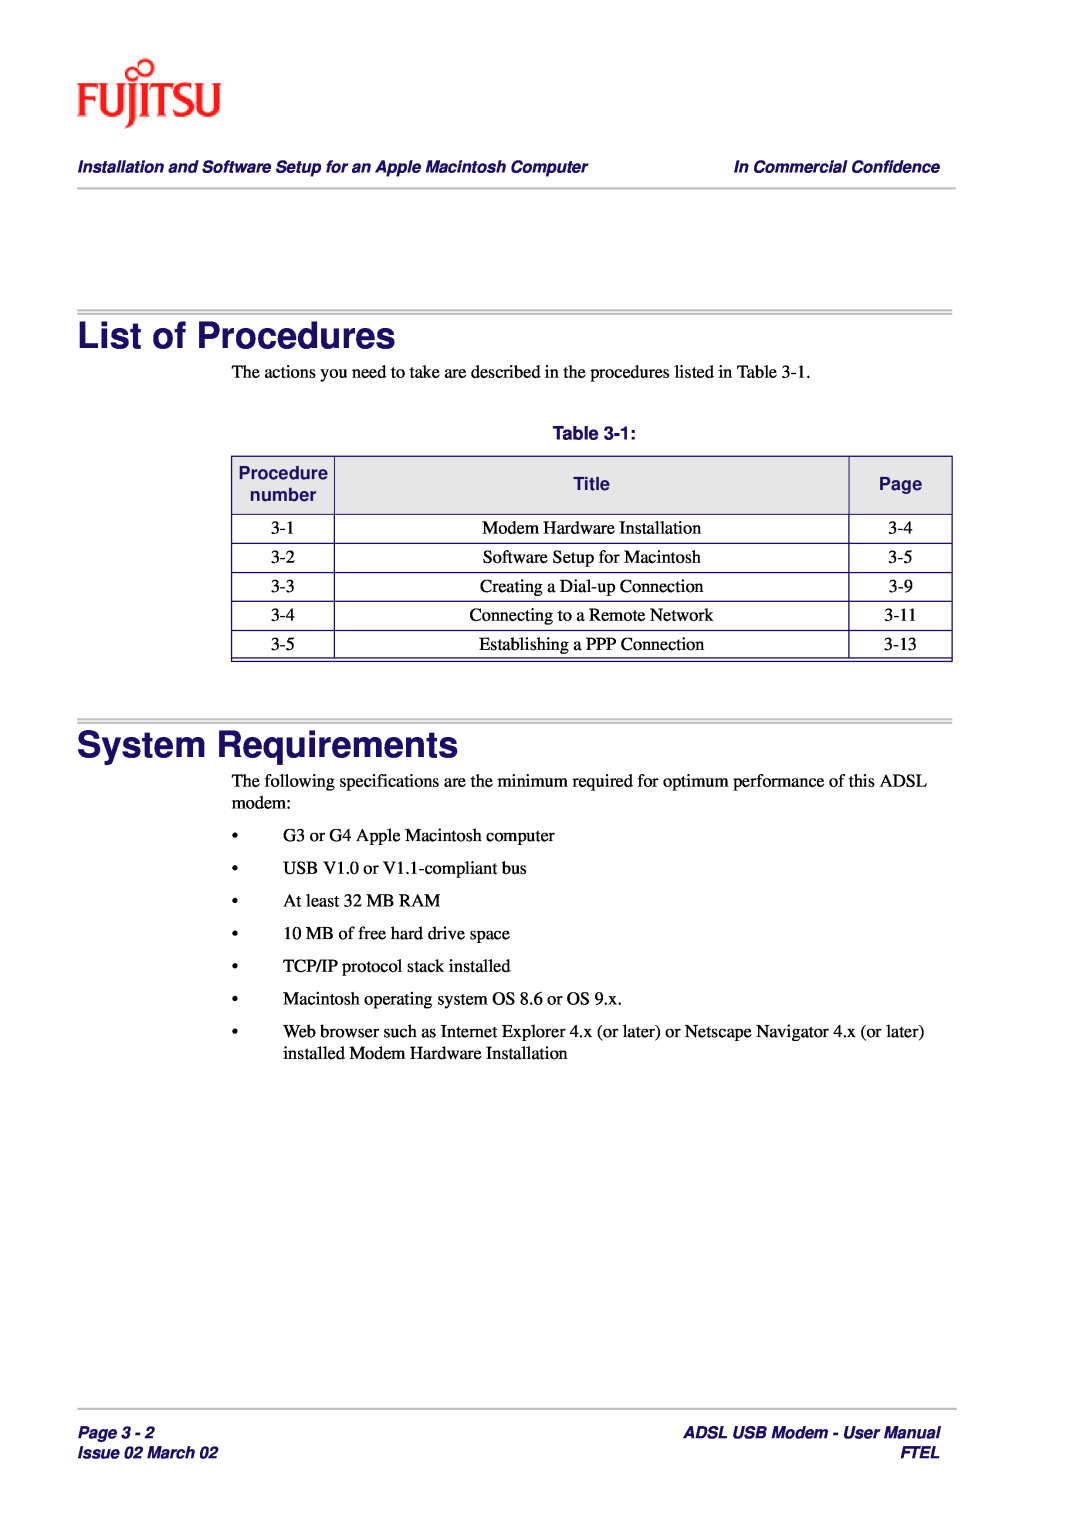 Fujitsu 3XAX-00803AAS user manual List of Procedures, System Requirements, Title, Page, number 